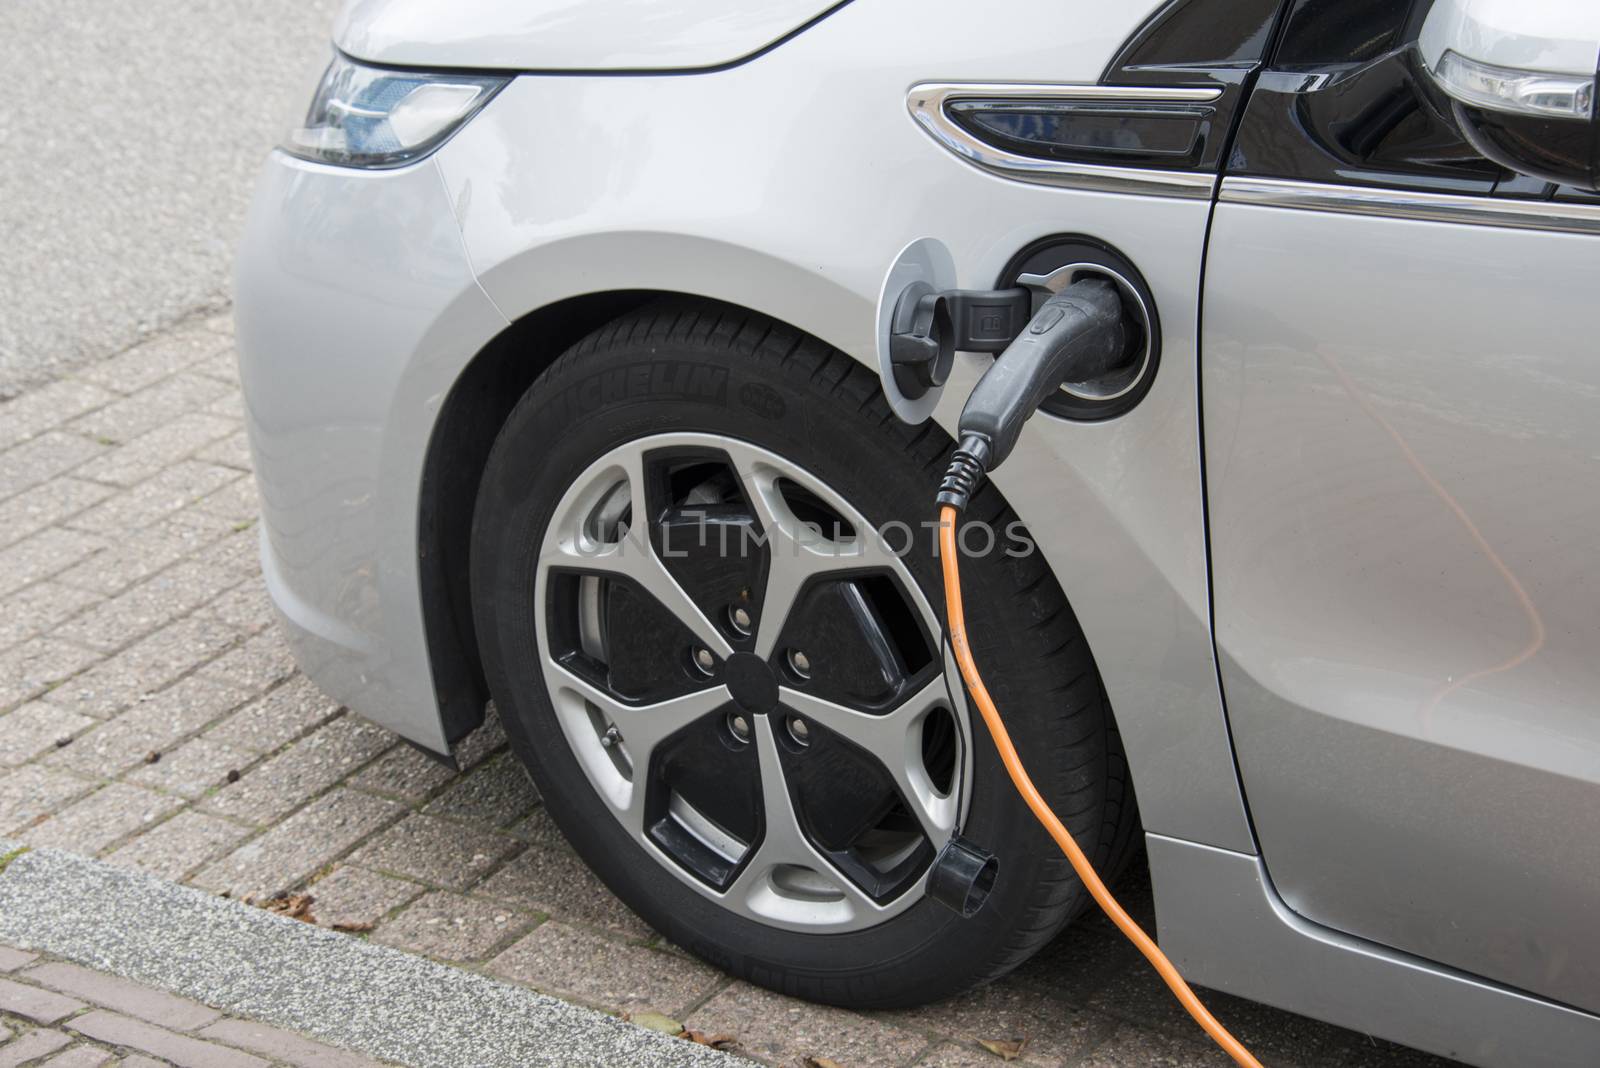 the power supply for Charging of an electric car by compuinfoto